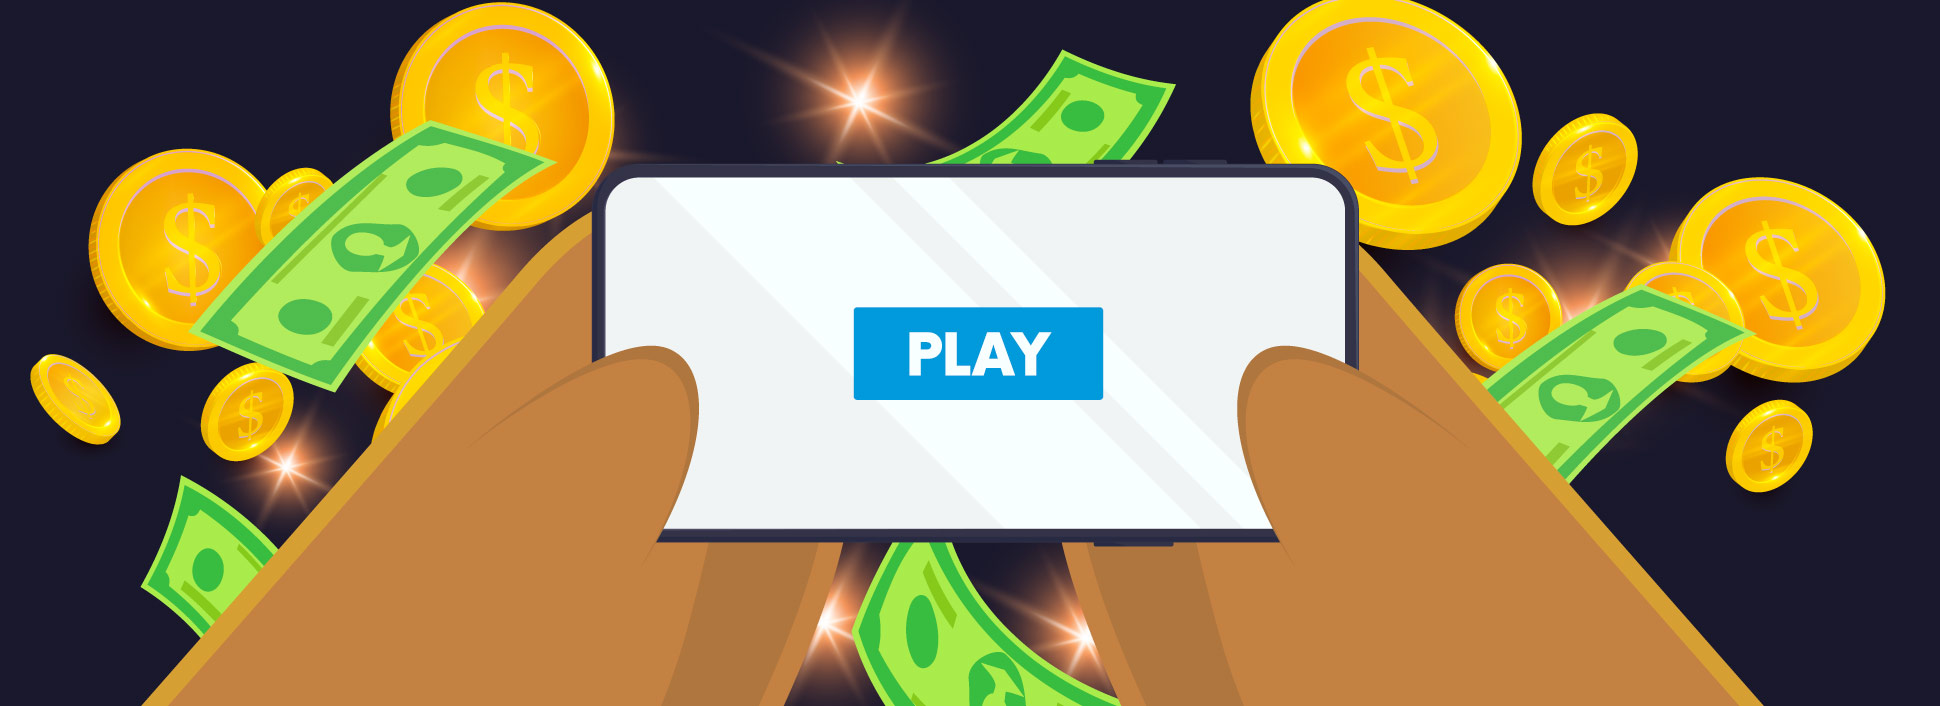 game-apps-win-real-money@2x